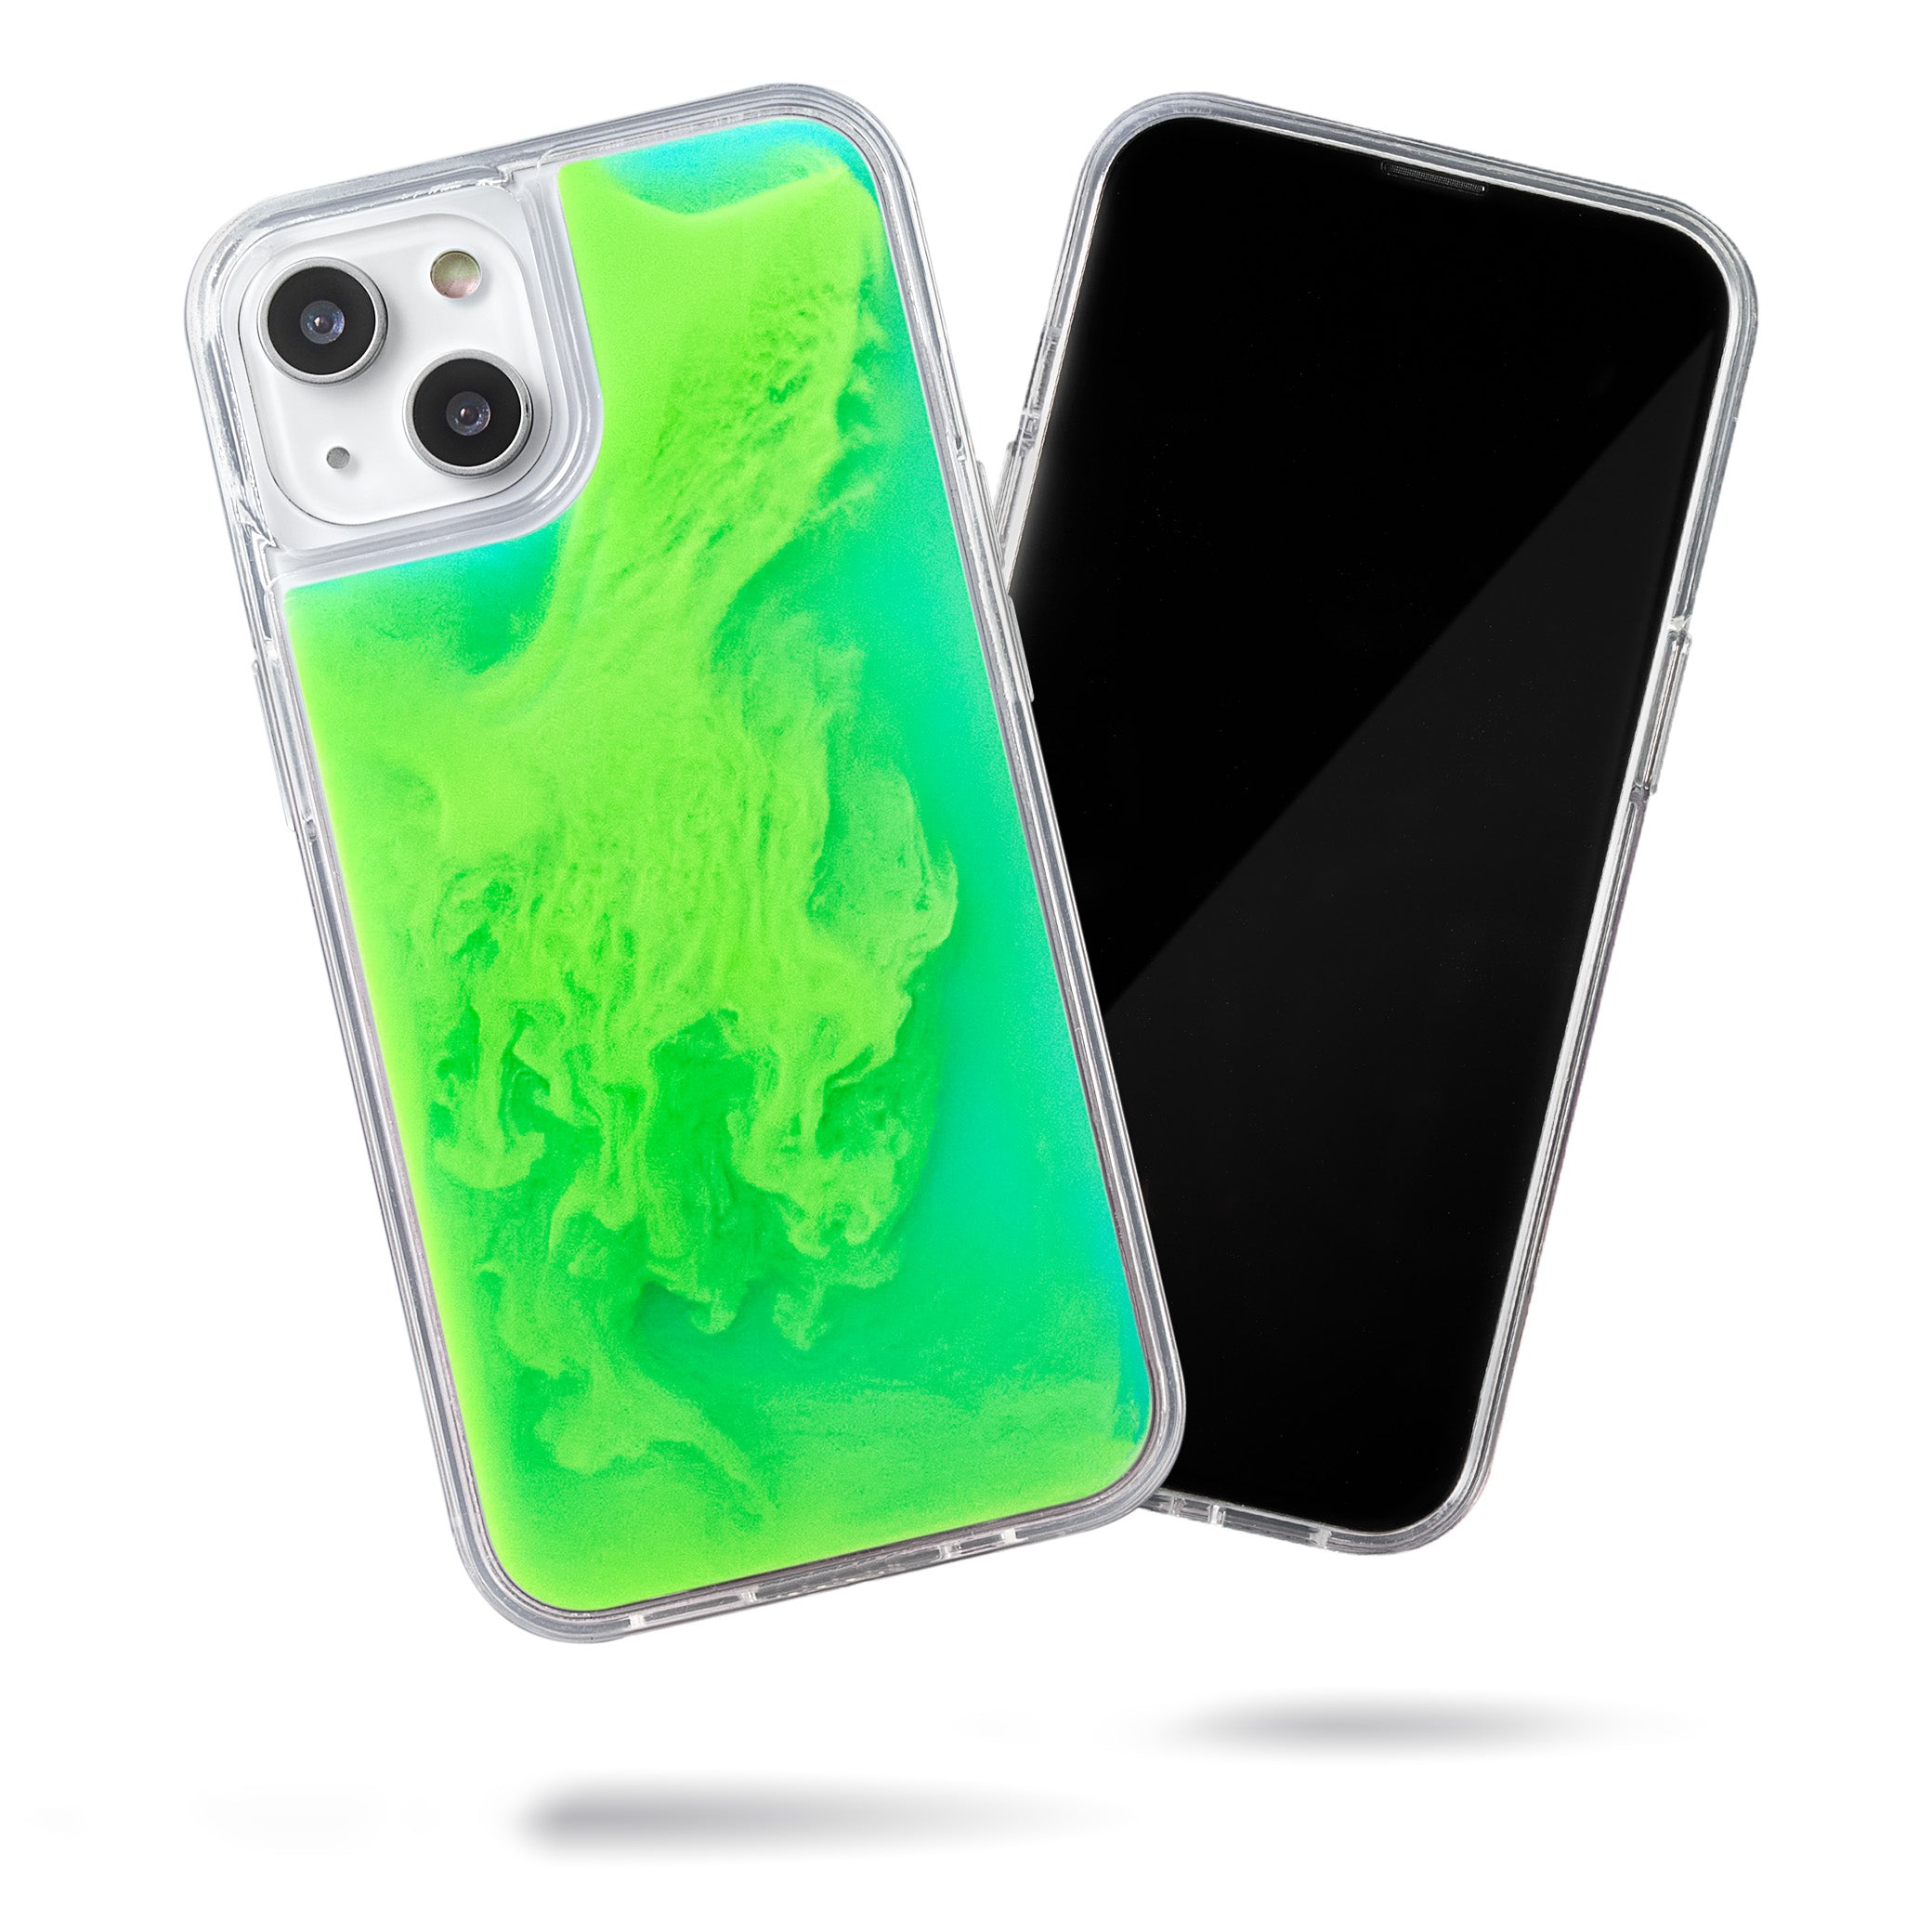 Neon Sand Case for iPhone 13 - Mint and Neon Green Glow